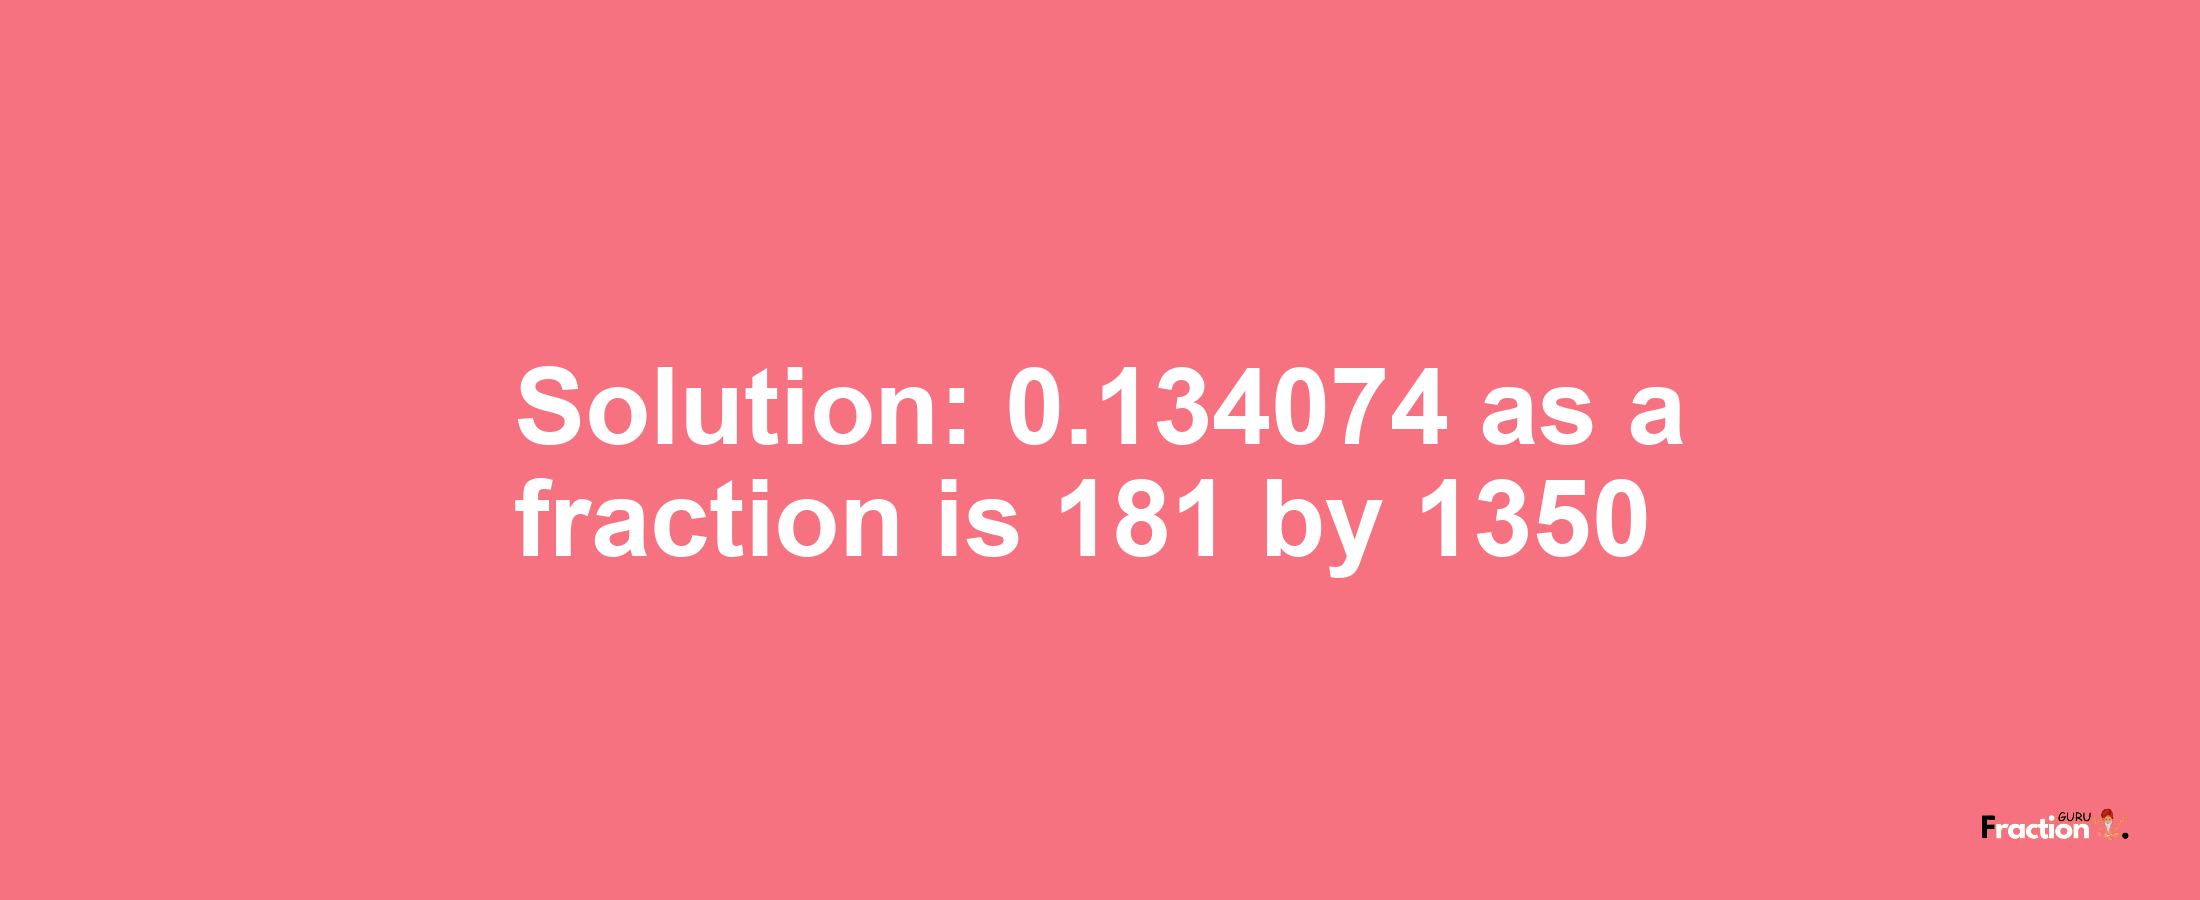 Solution:0.134074 as a fraction is 181/1350